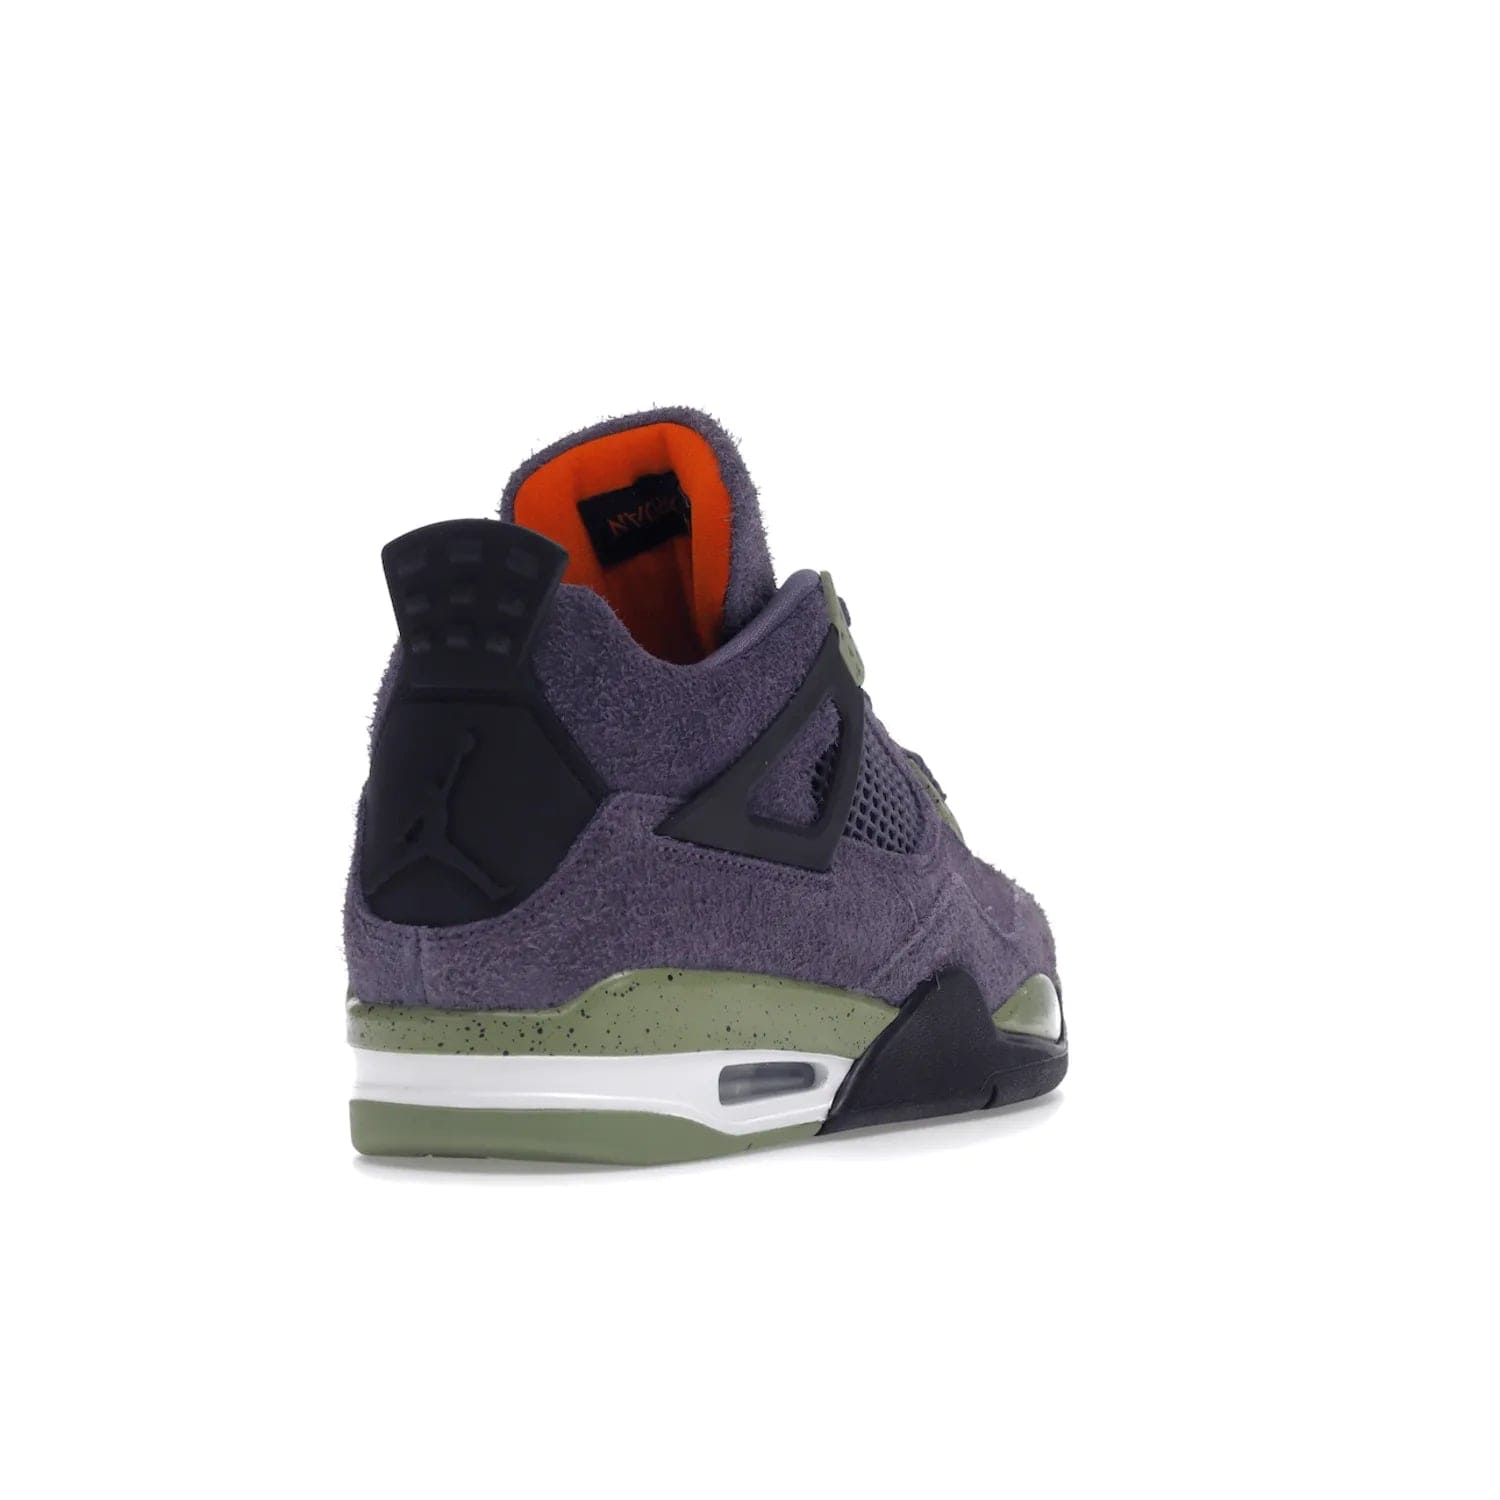 Jordan 4 Retro Canyon Purple (Women's) - Image 31 - Only at www.BallersClubKickz.com - New Air Jordan 4 Retro Canyon Purple W sneaker features shaggy purple suede, lime highlights & safety orange Jumpman branding. Classic ankle-hugging silhouette with modern colors released 15/10/2022.